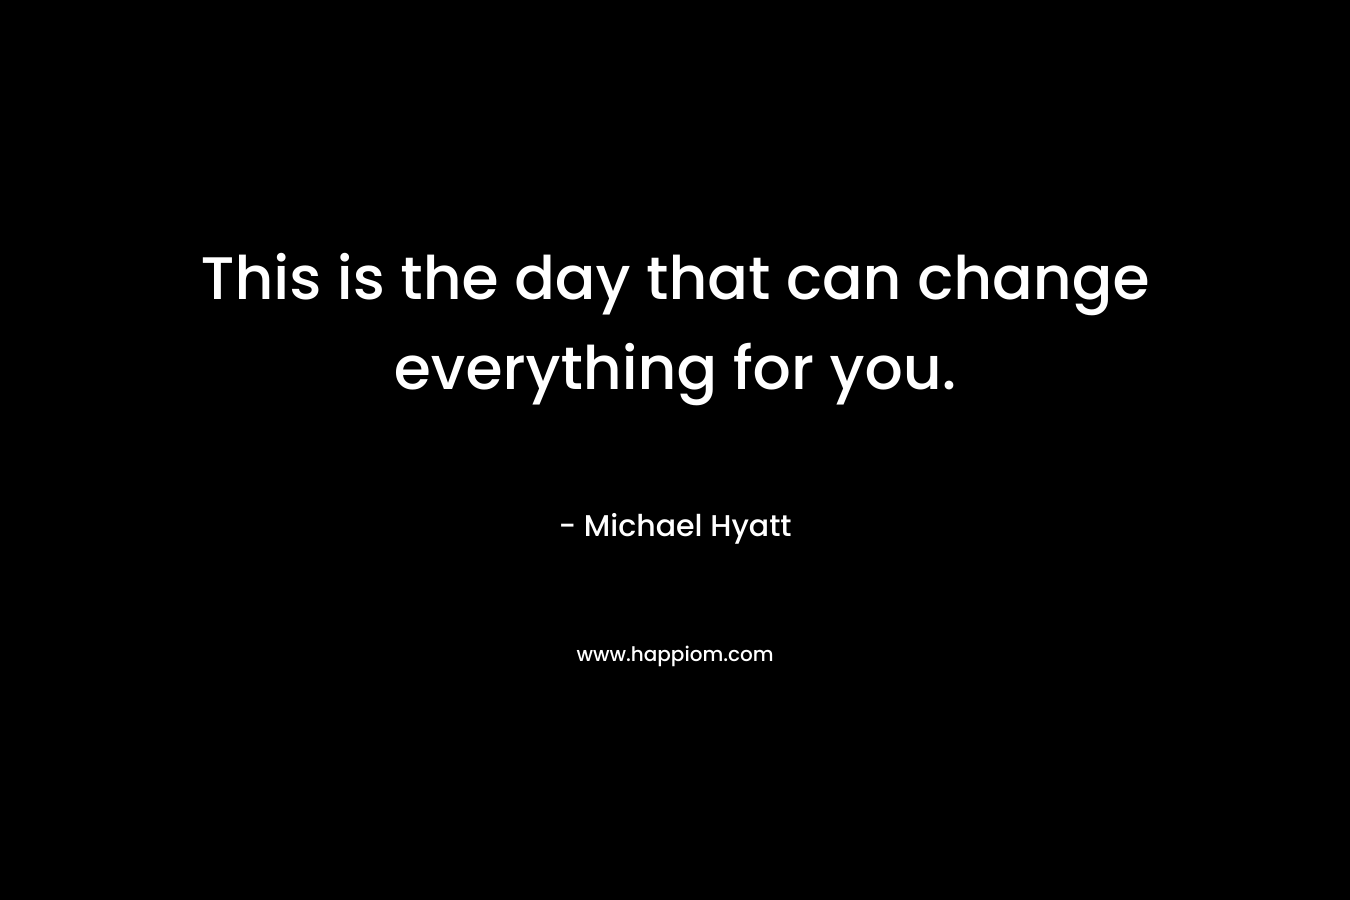 This is the day that can change everything for you.